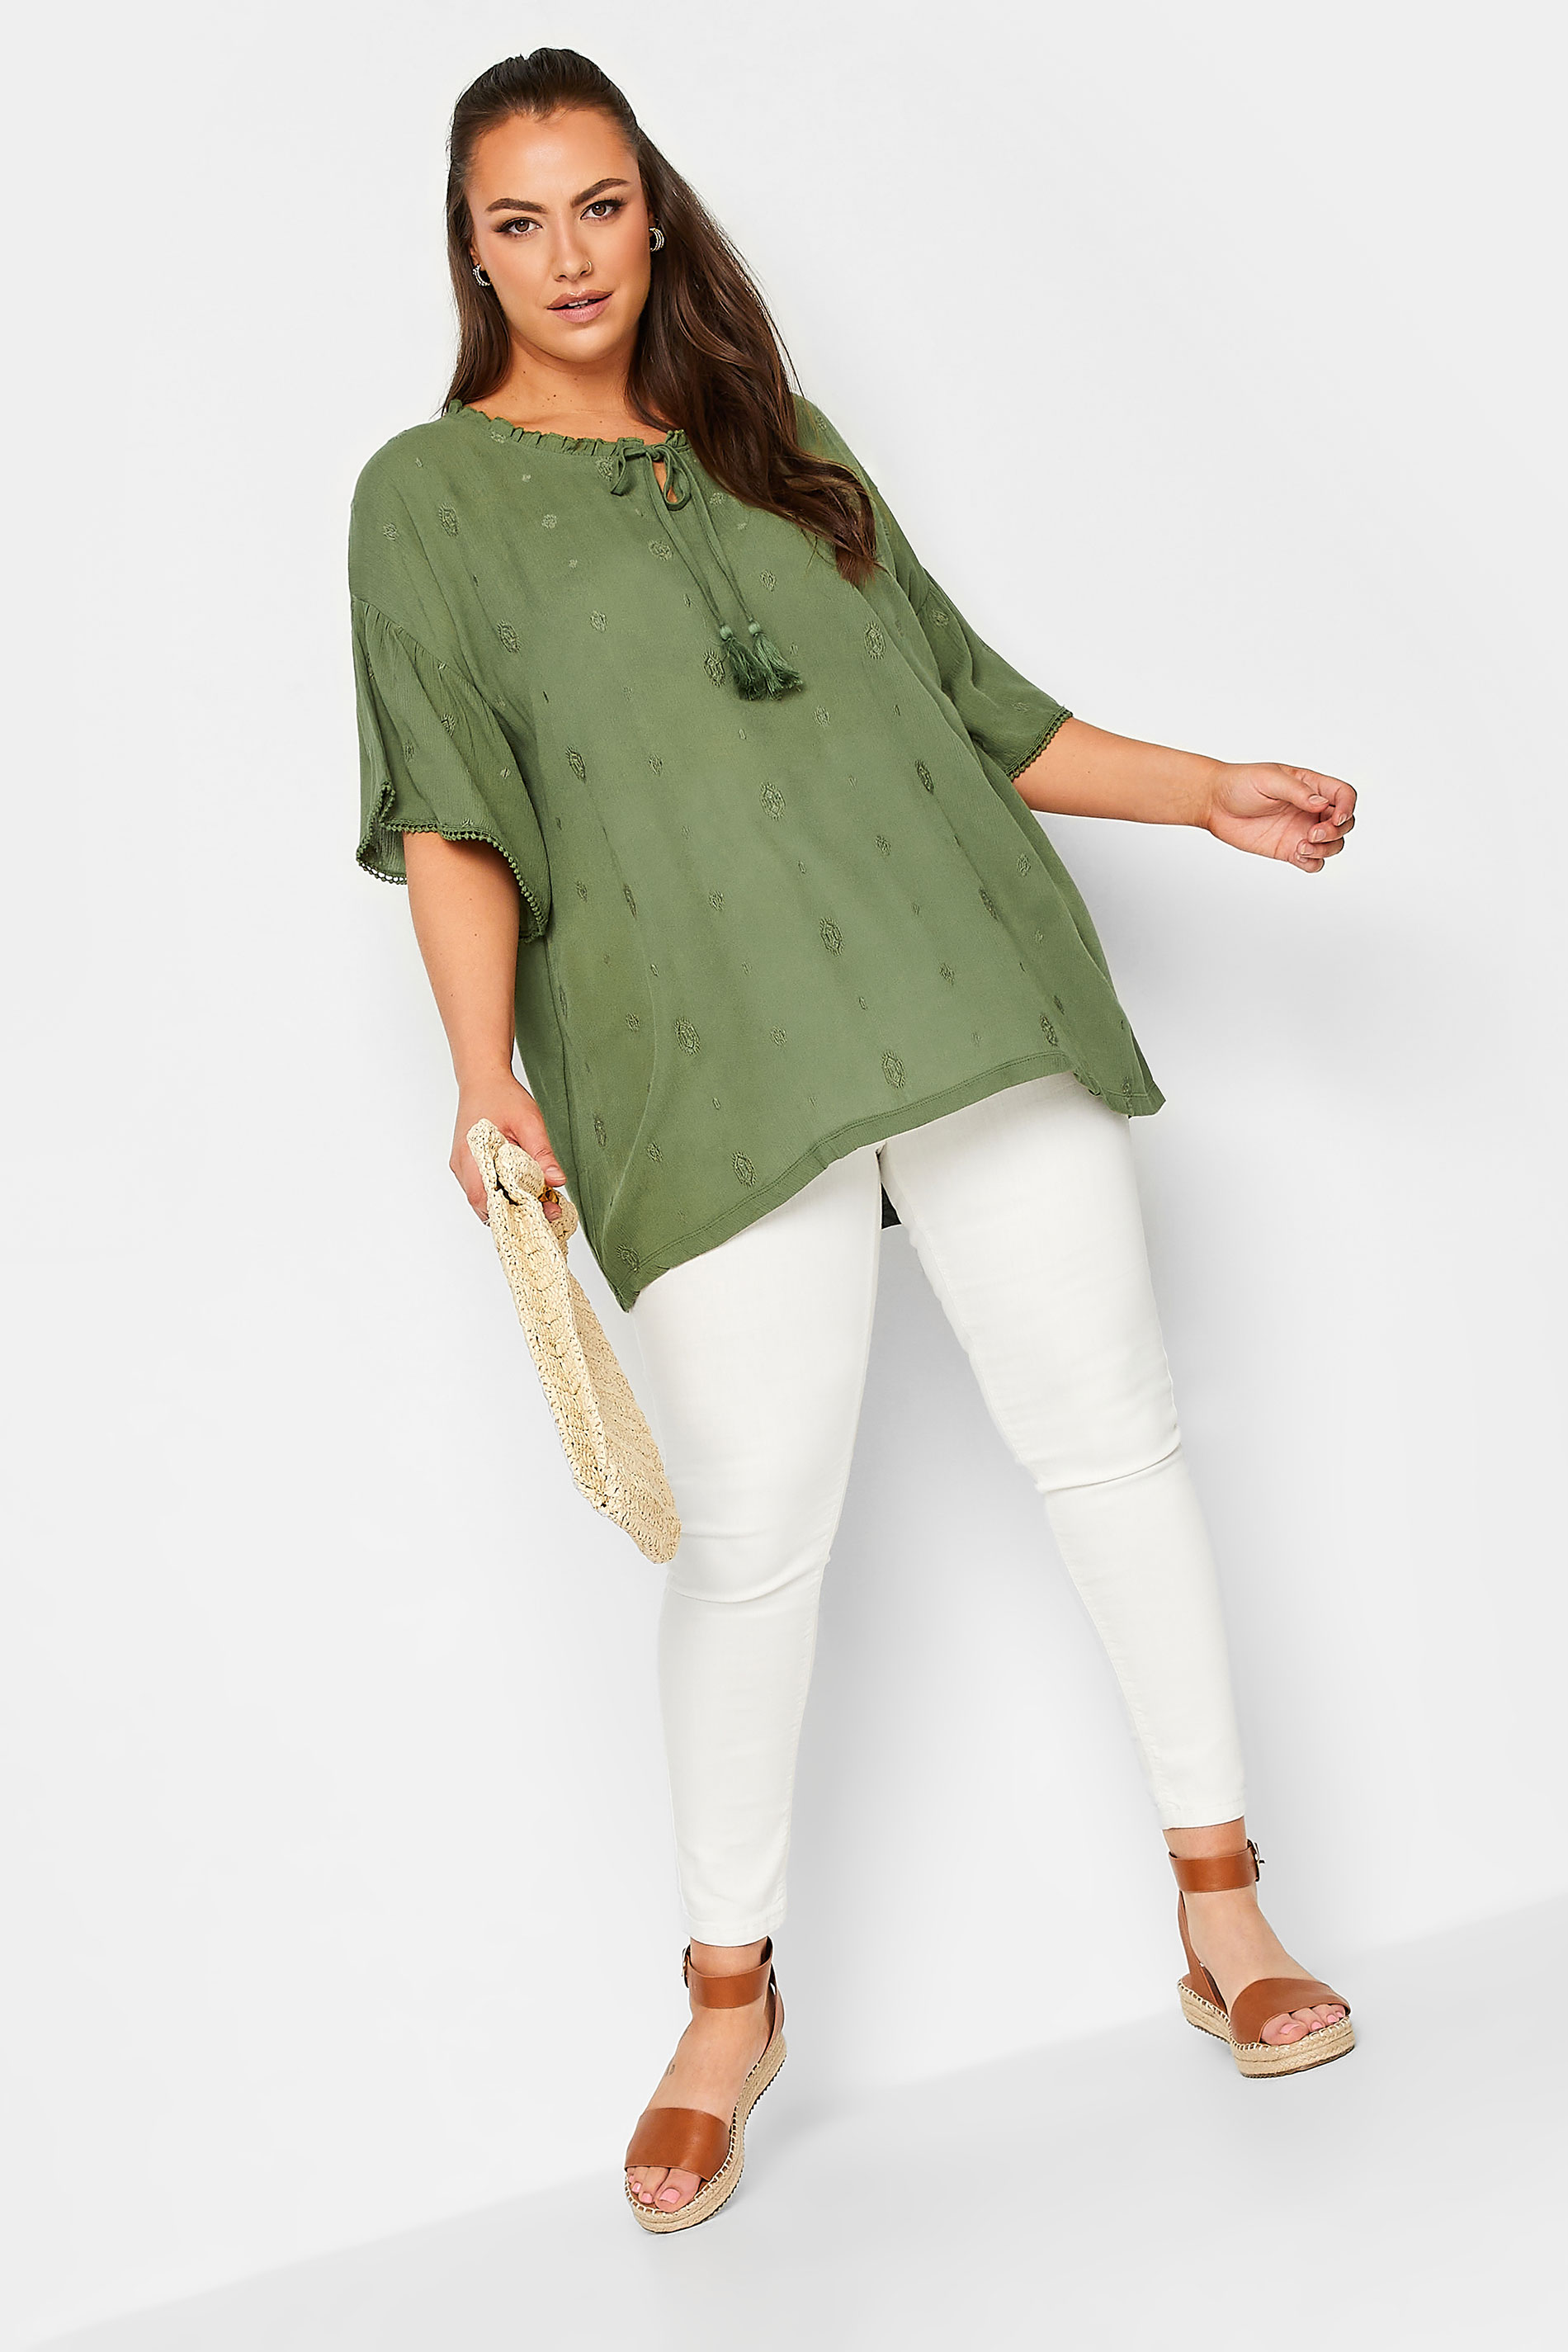 YOURS Curve Plus Size Khaki Green Tie Neck Embroidered Top | Yours Clothing  3